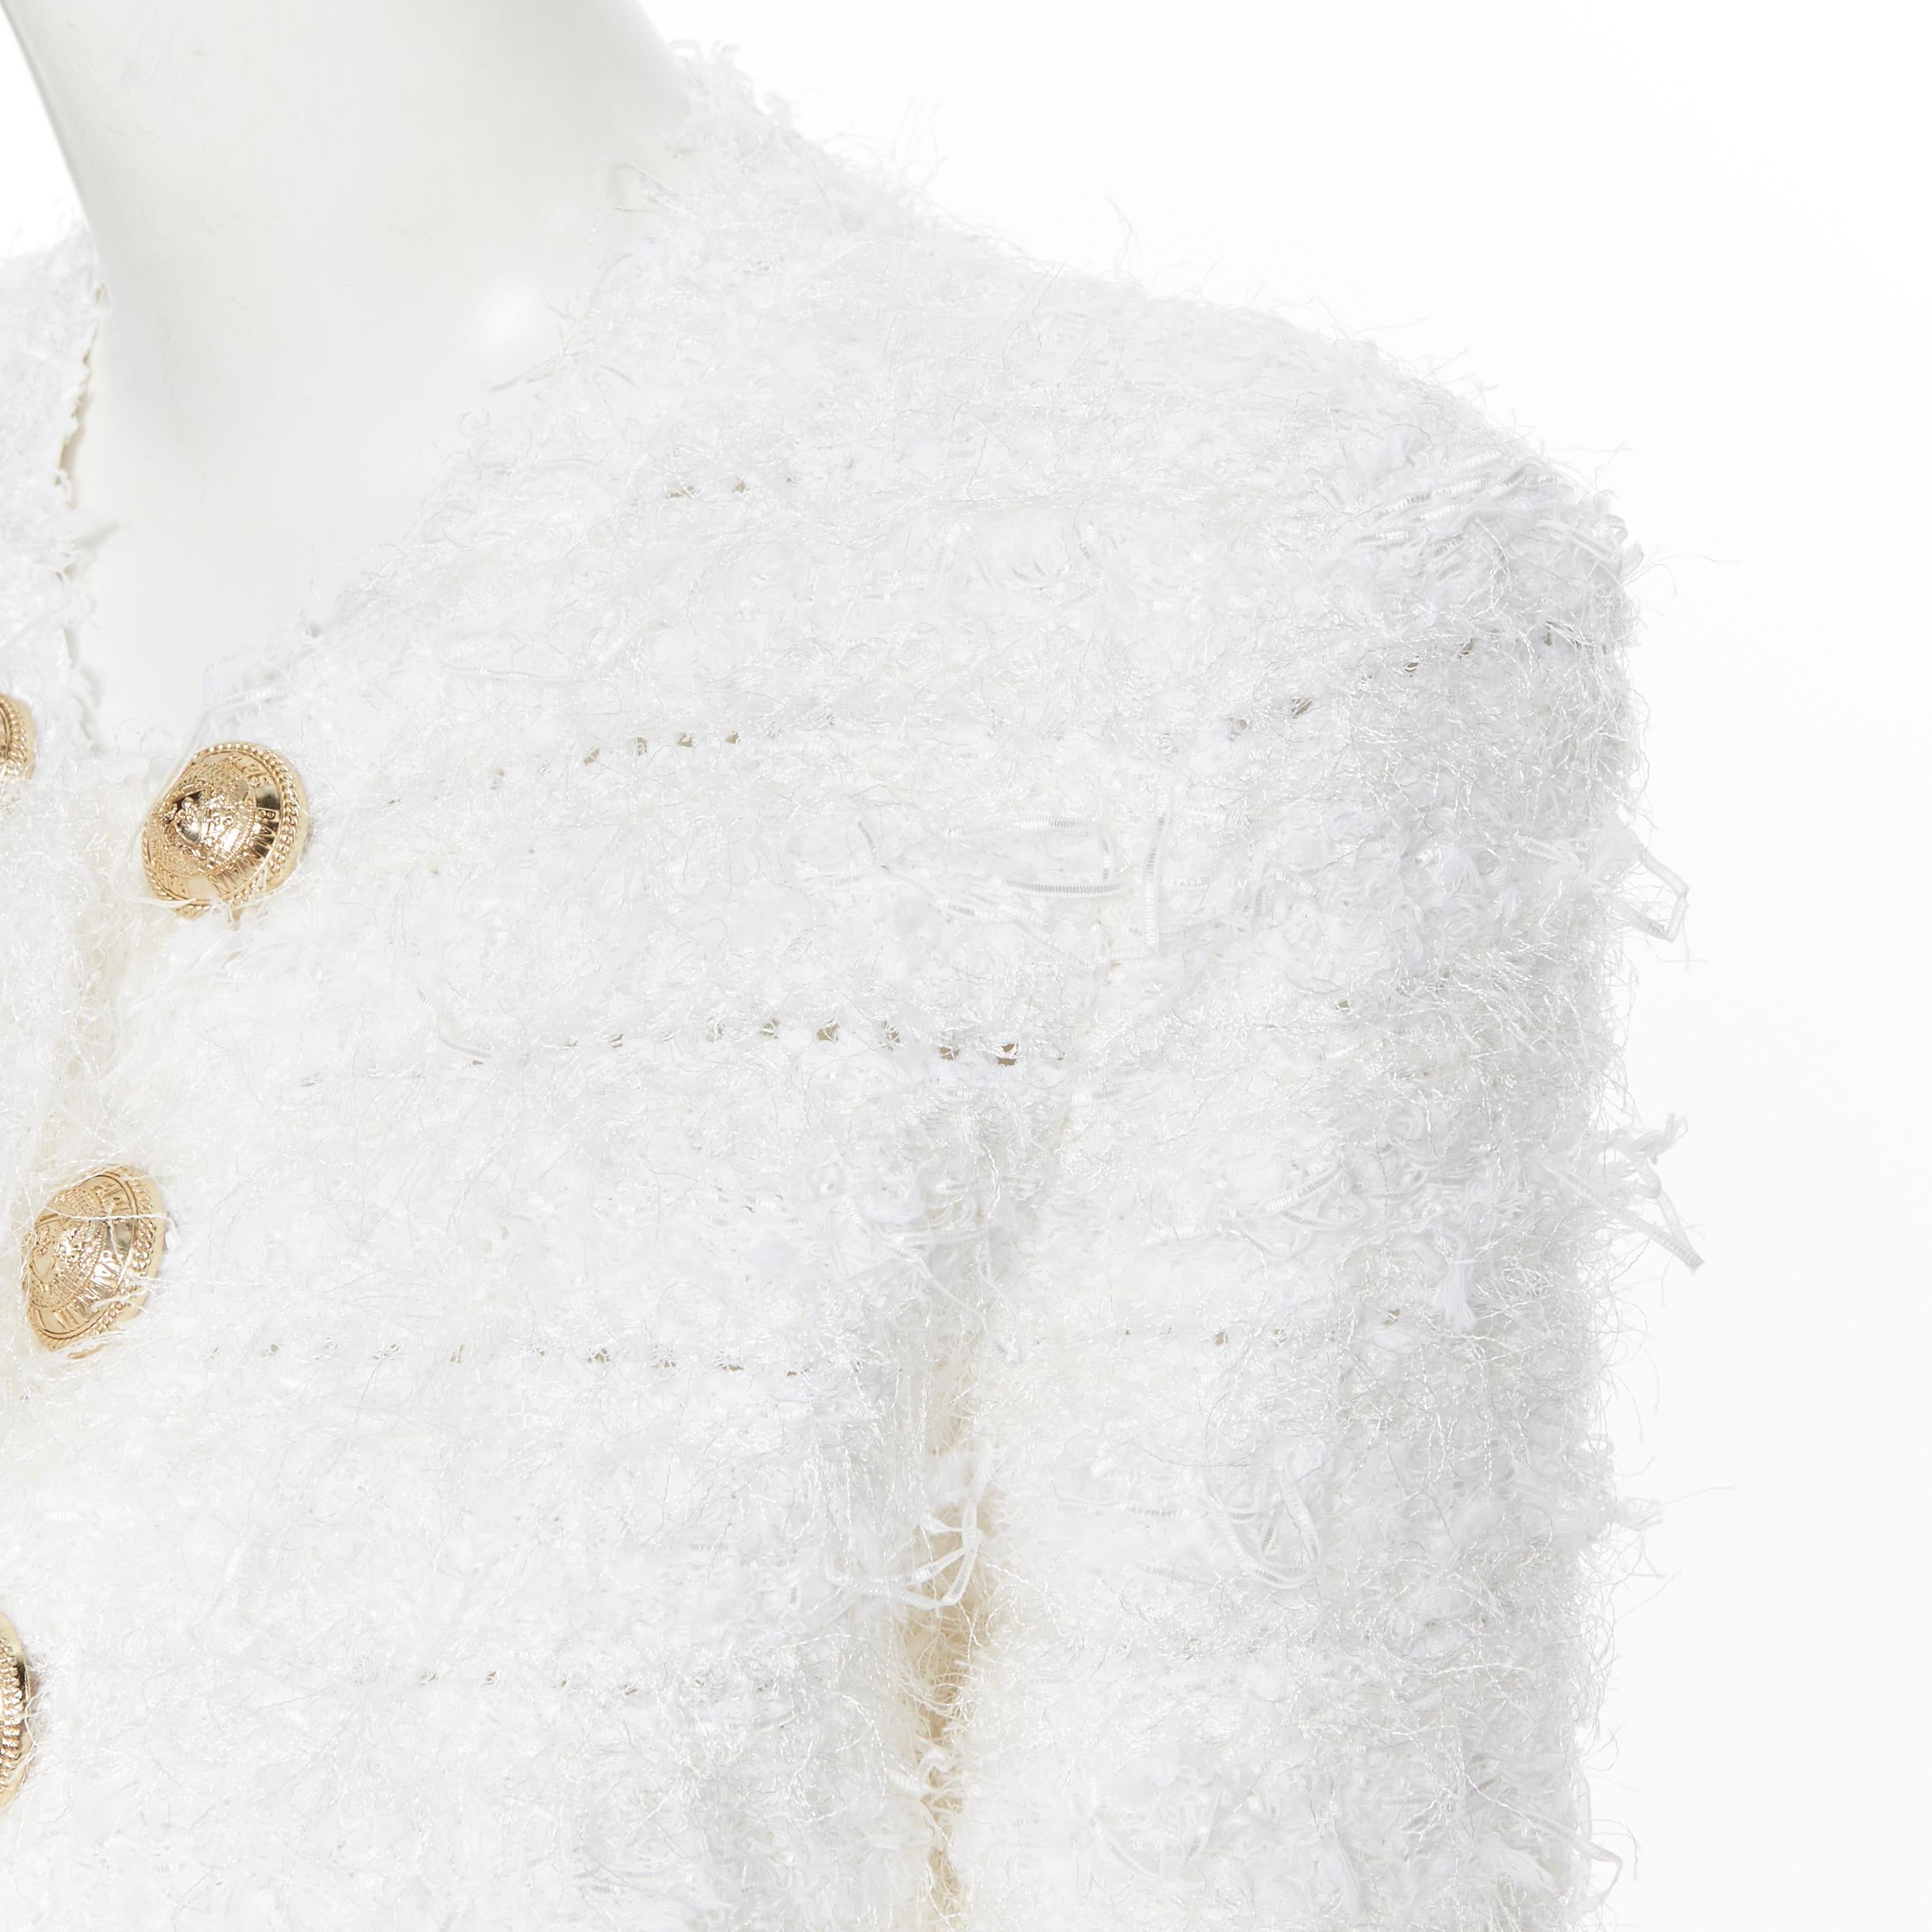 new BALMAIN white boucle double breasted fringe military cardigan jacket FR36 S
Brand: Balmain
Designer: Olivier Rousteing
Model Name / Style: Double breasted jacket
Material: Viscose blend
Color: White
Pattern: Solid
Closure: Button
Extra Detail: